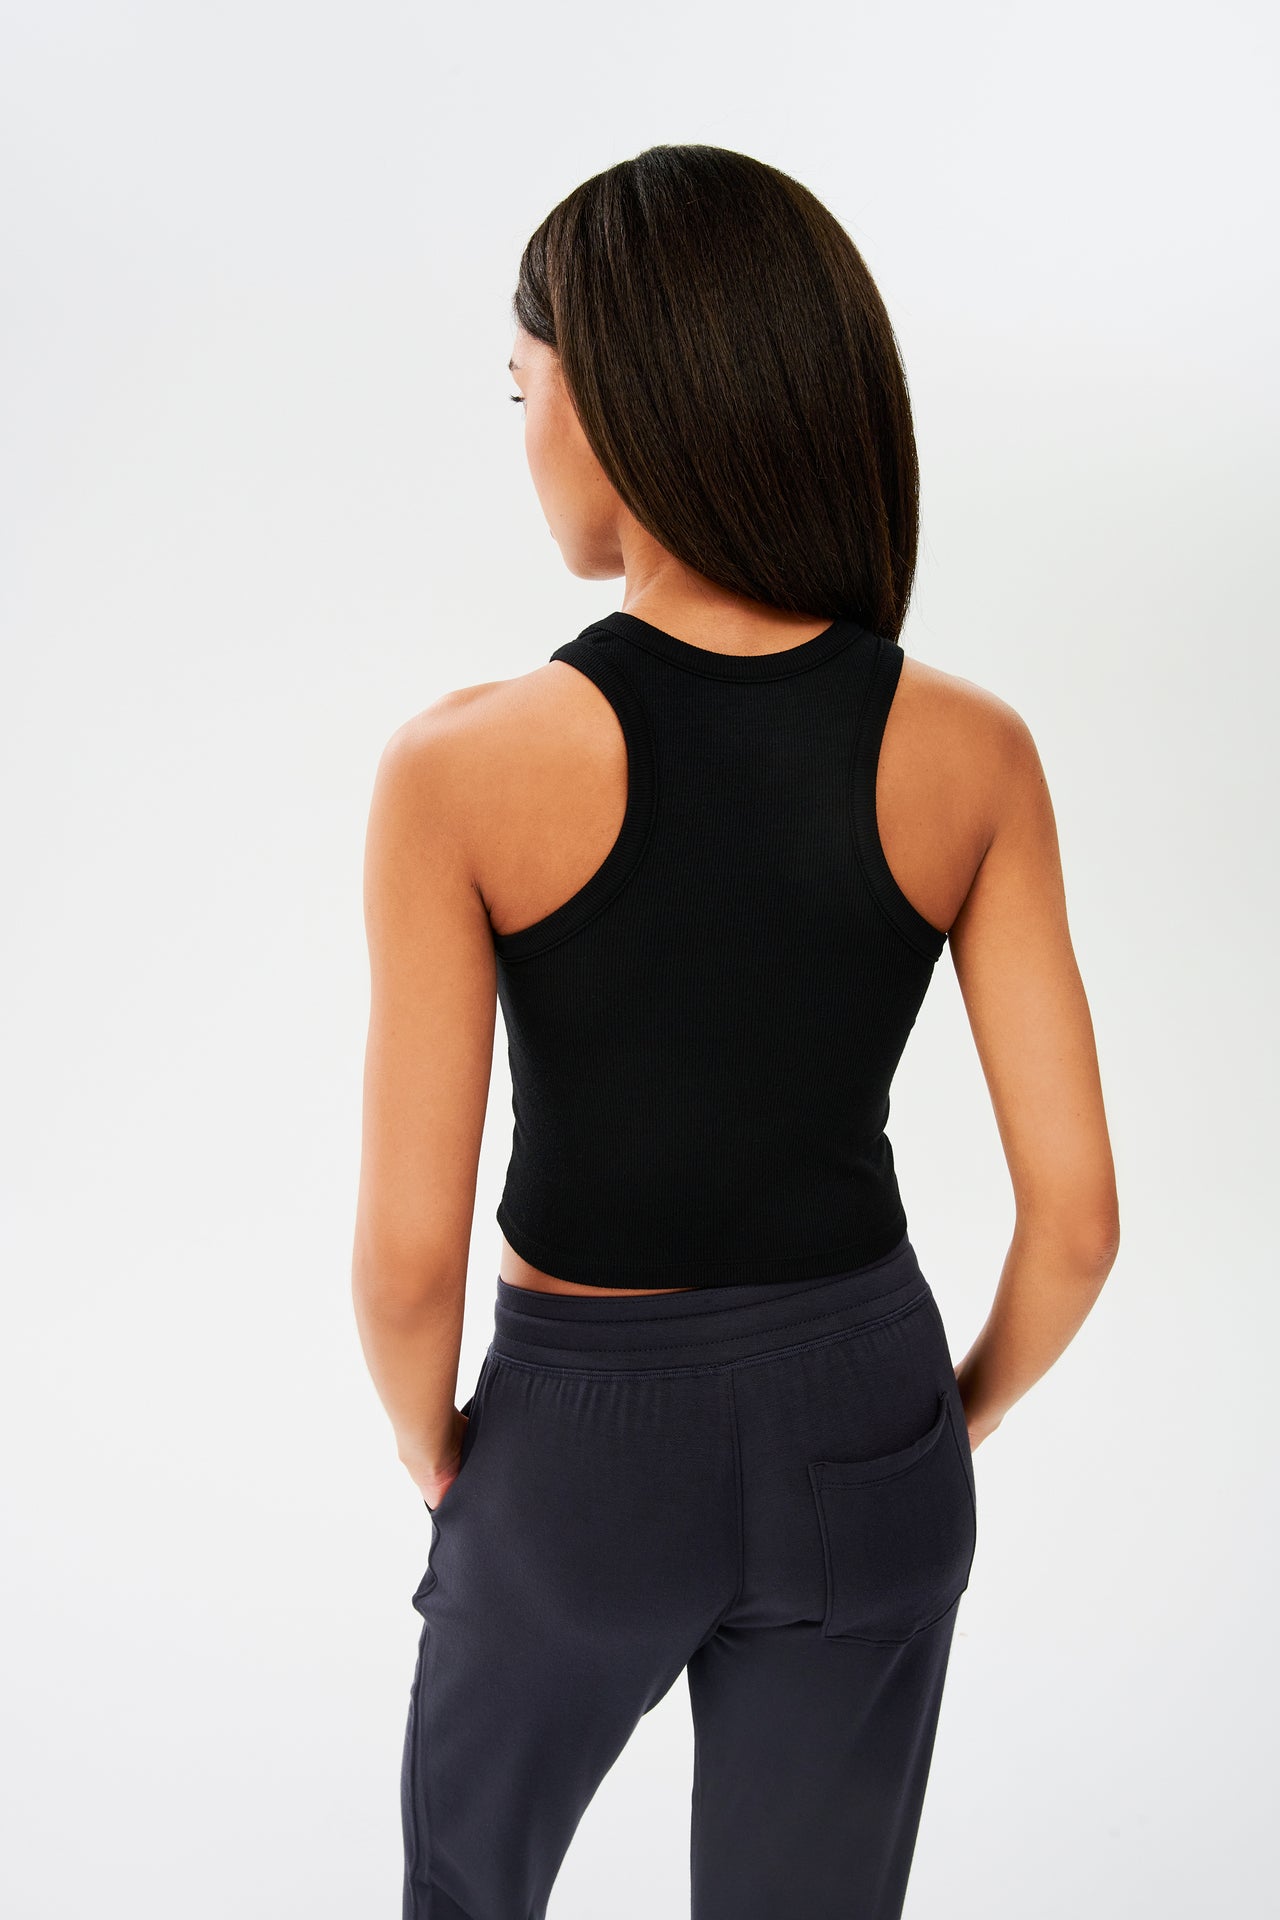 The back view of a woman wearing a SPLITS59 Kiki Rib Crop Tank in Black and grey sweatpants, ideal for gym workouts.